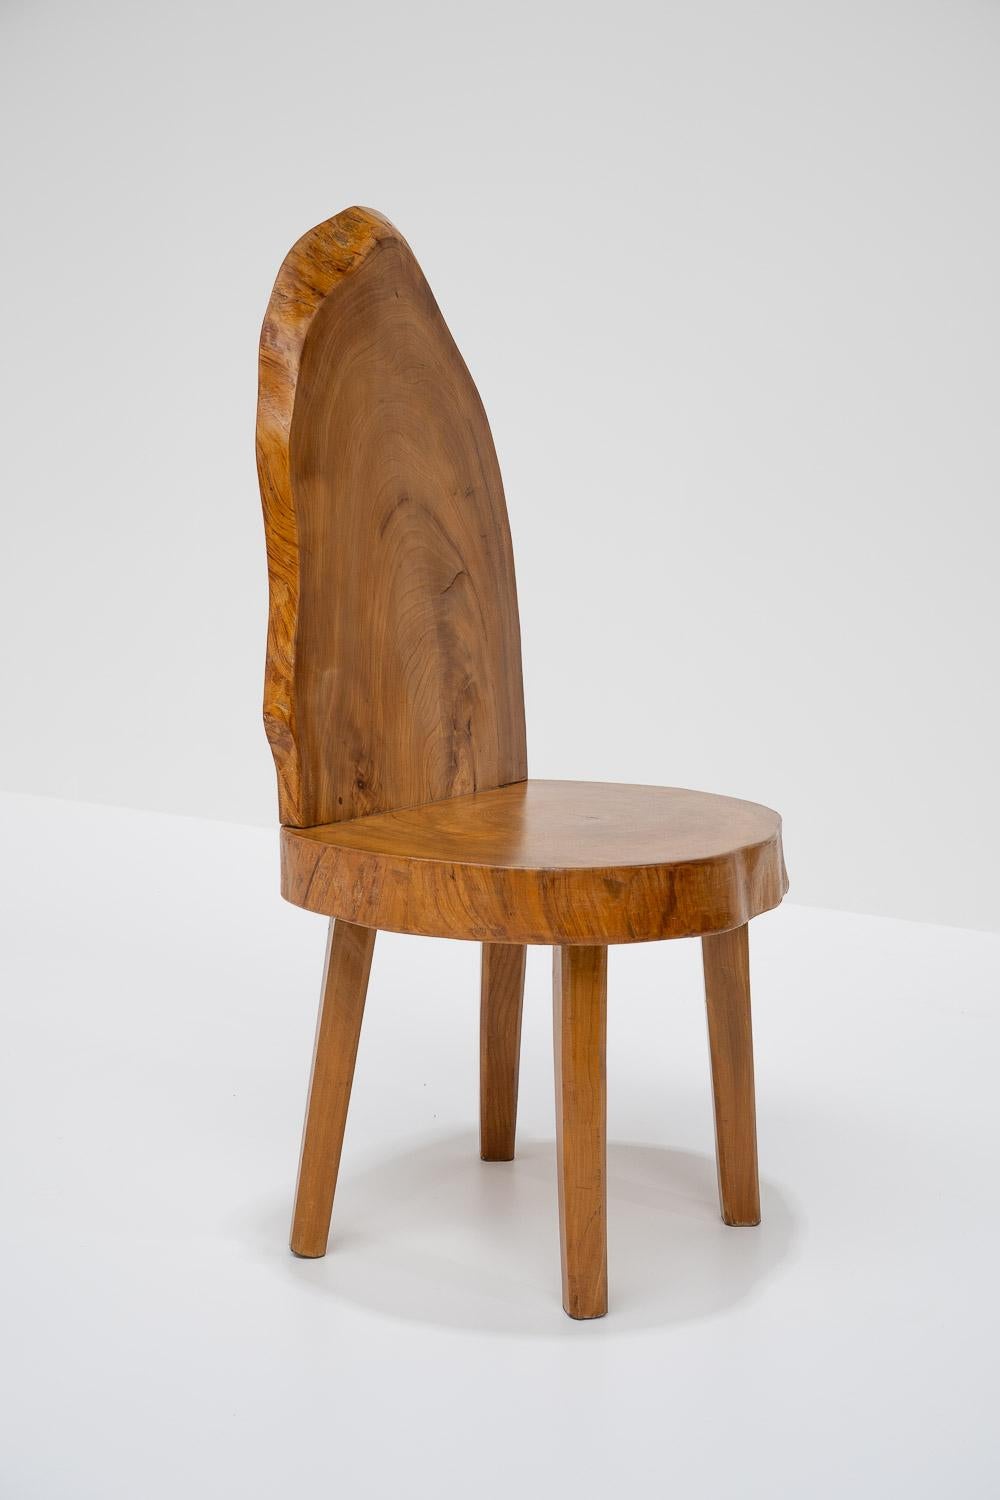 Carved Wooden Tree Trunk Chairs, France, 1980s For Sale 7